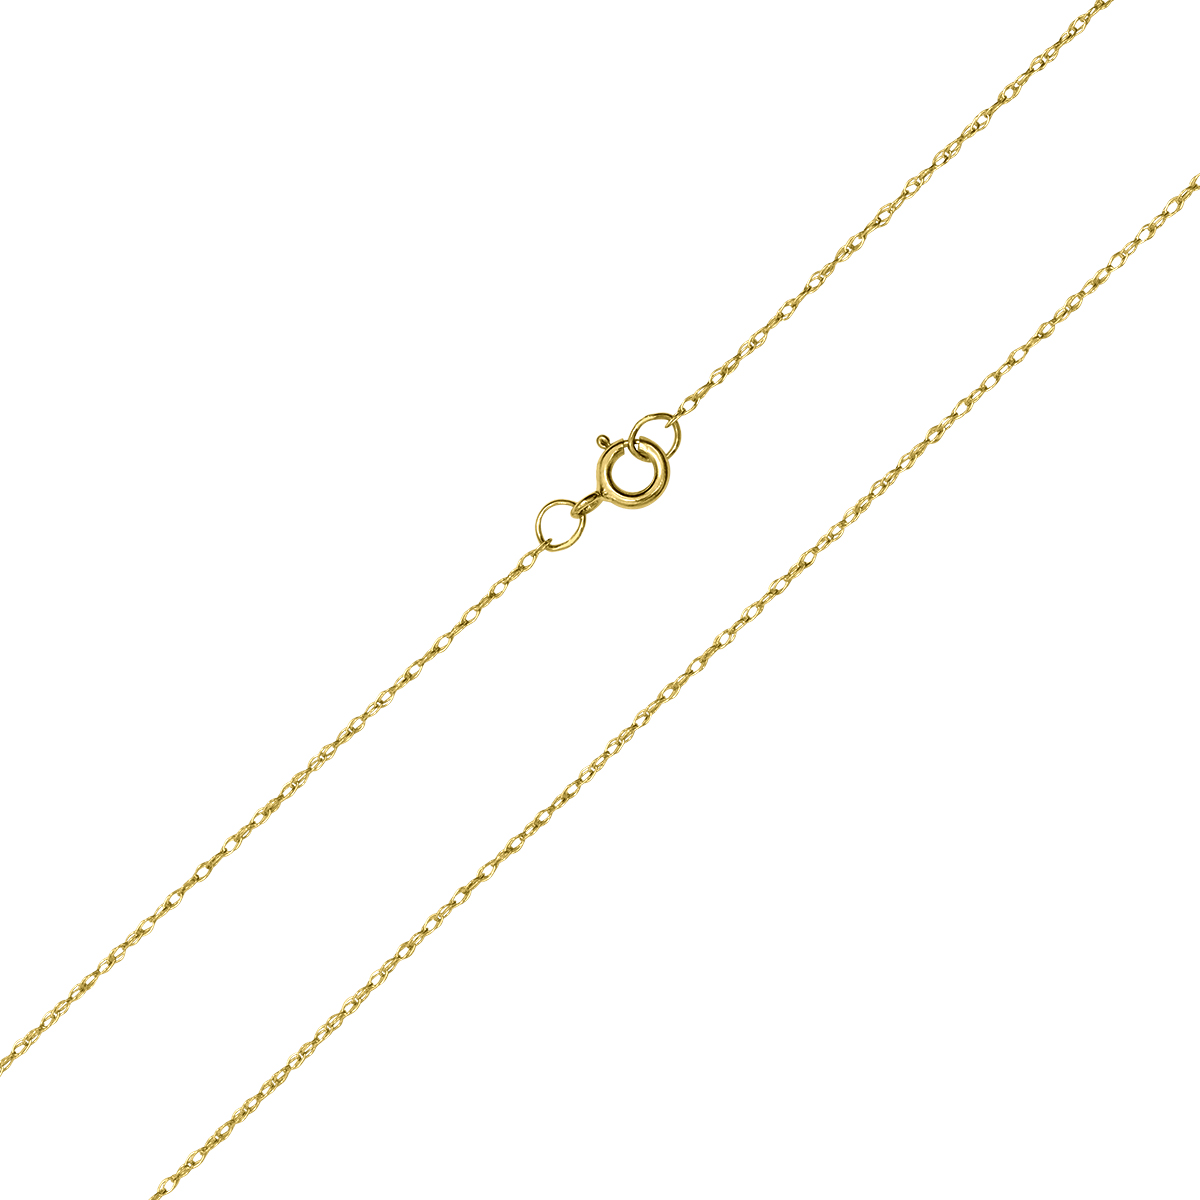 10K Yellow Gold .3MM Shiny Carded Rope Chain with Spring Ring Clasp - 16 Inch